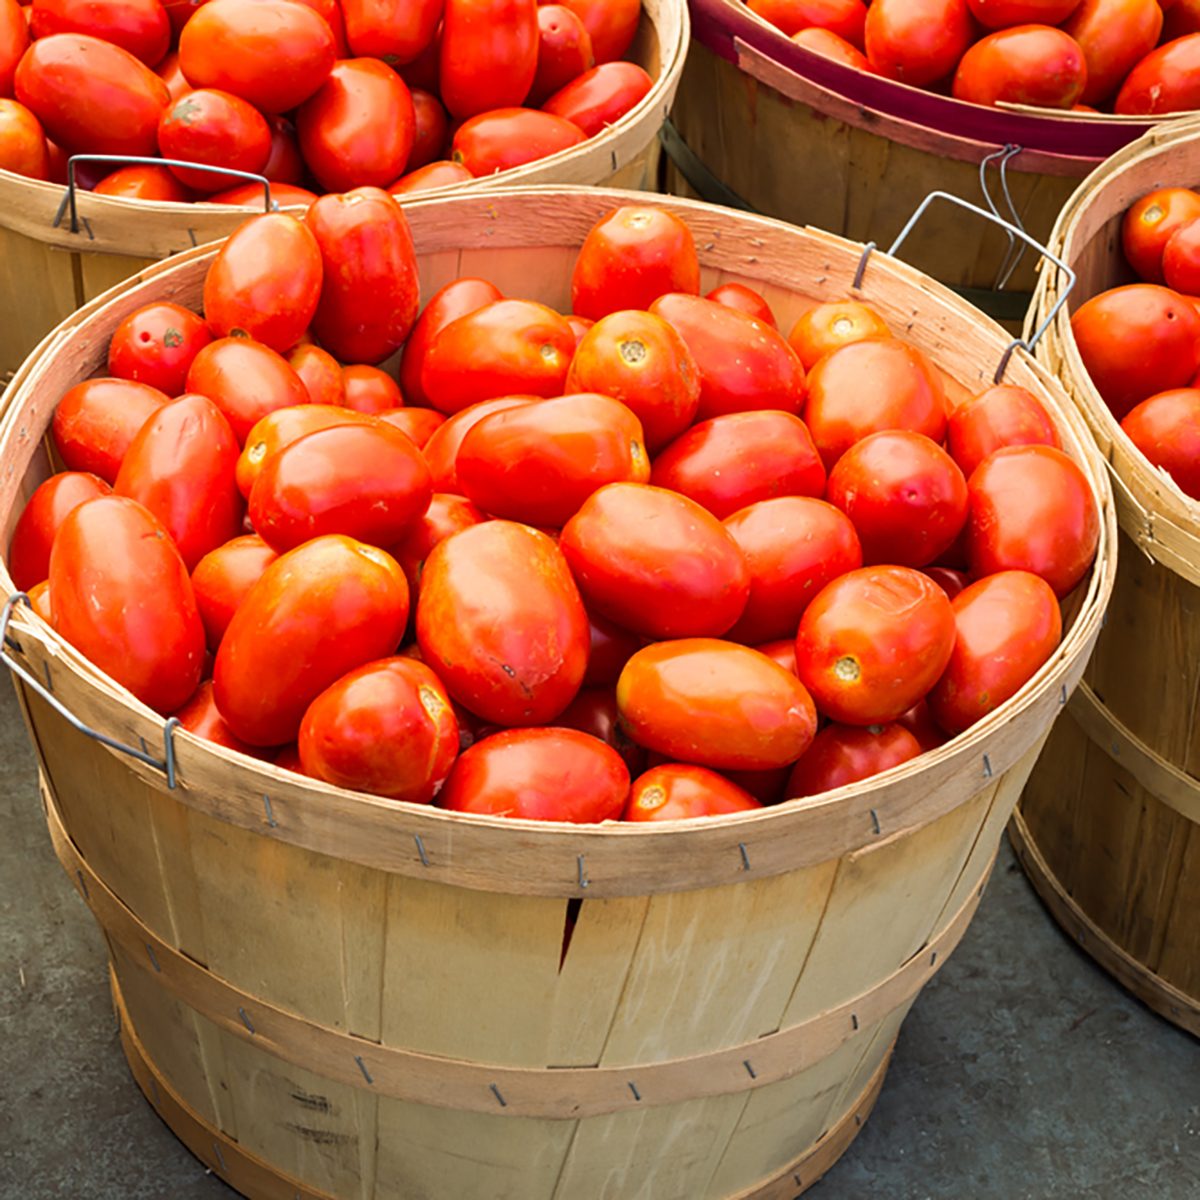 Many Roma tomatoes in baskets at the market